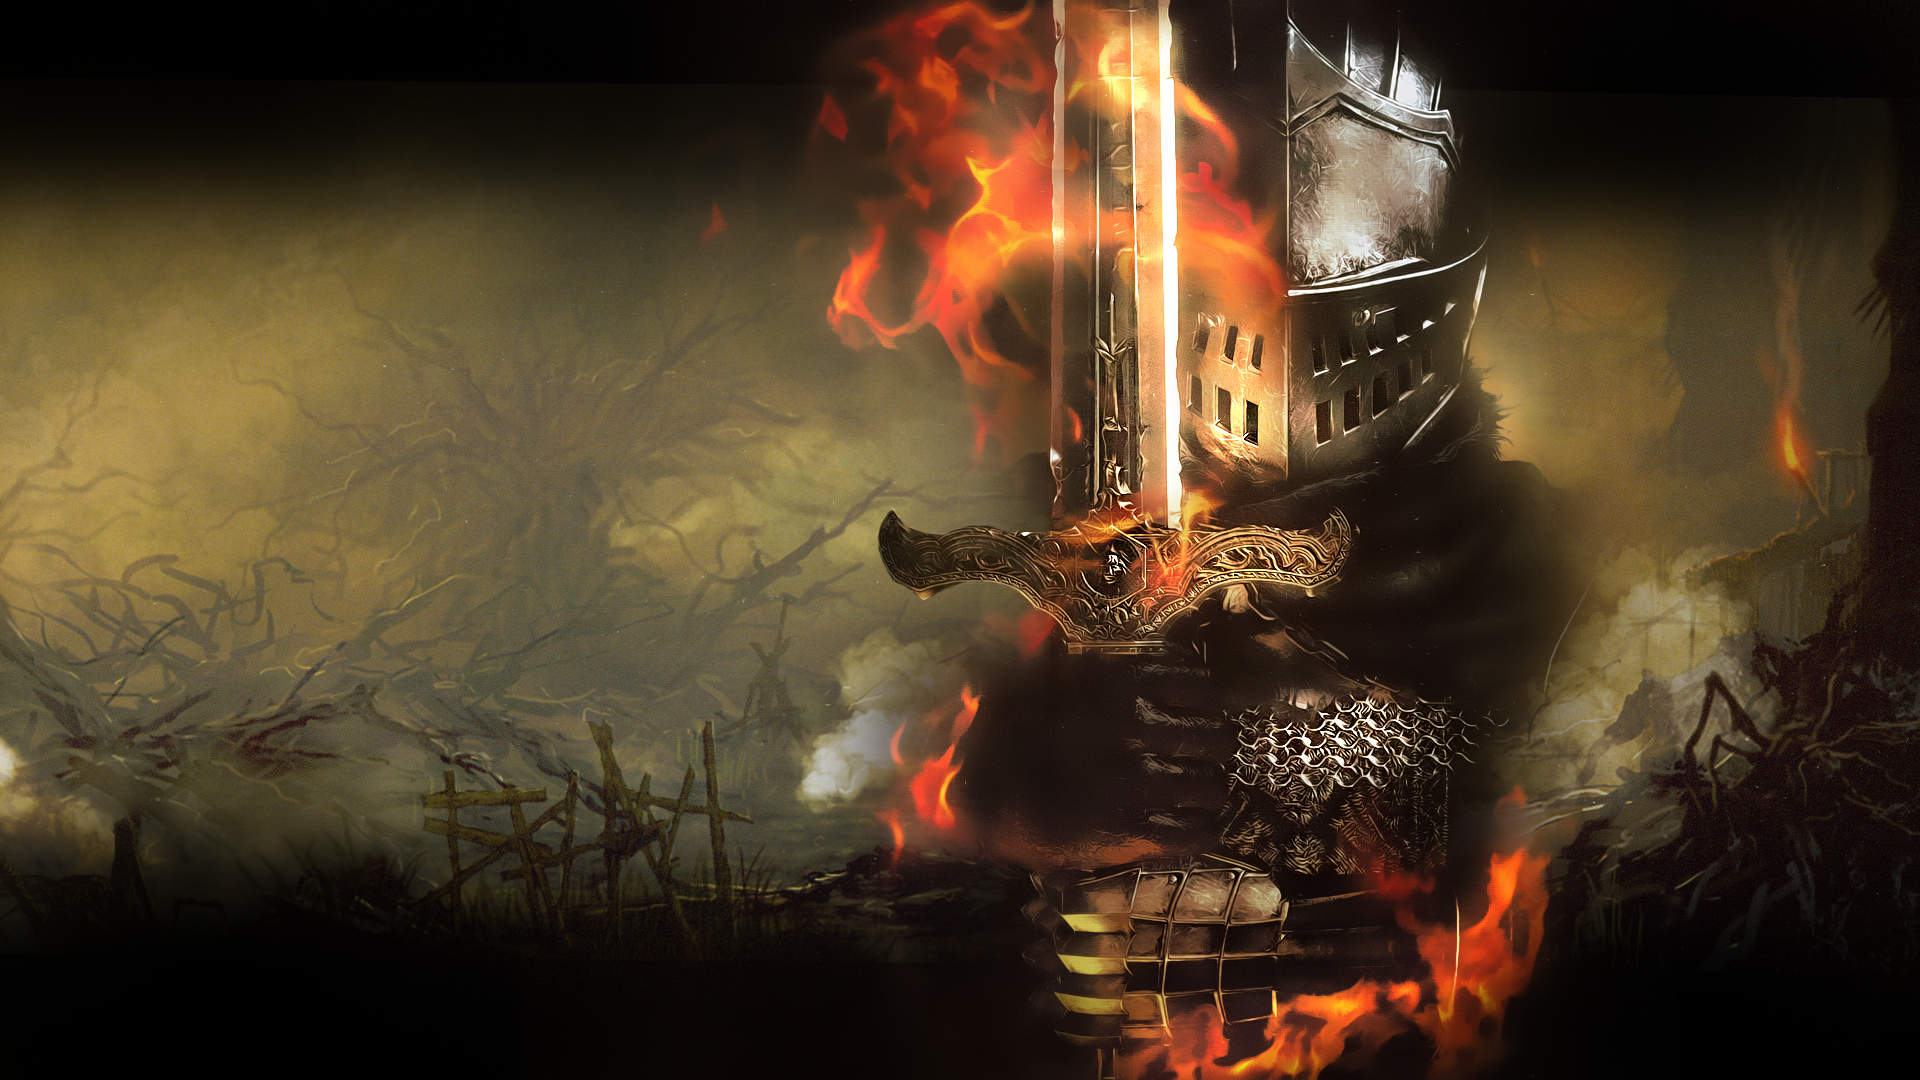 Dark Souls Wallpaper Android Pictures In High Definition Or